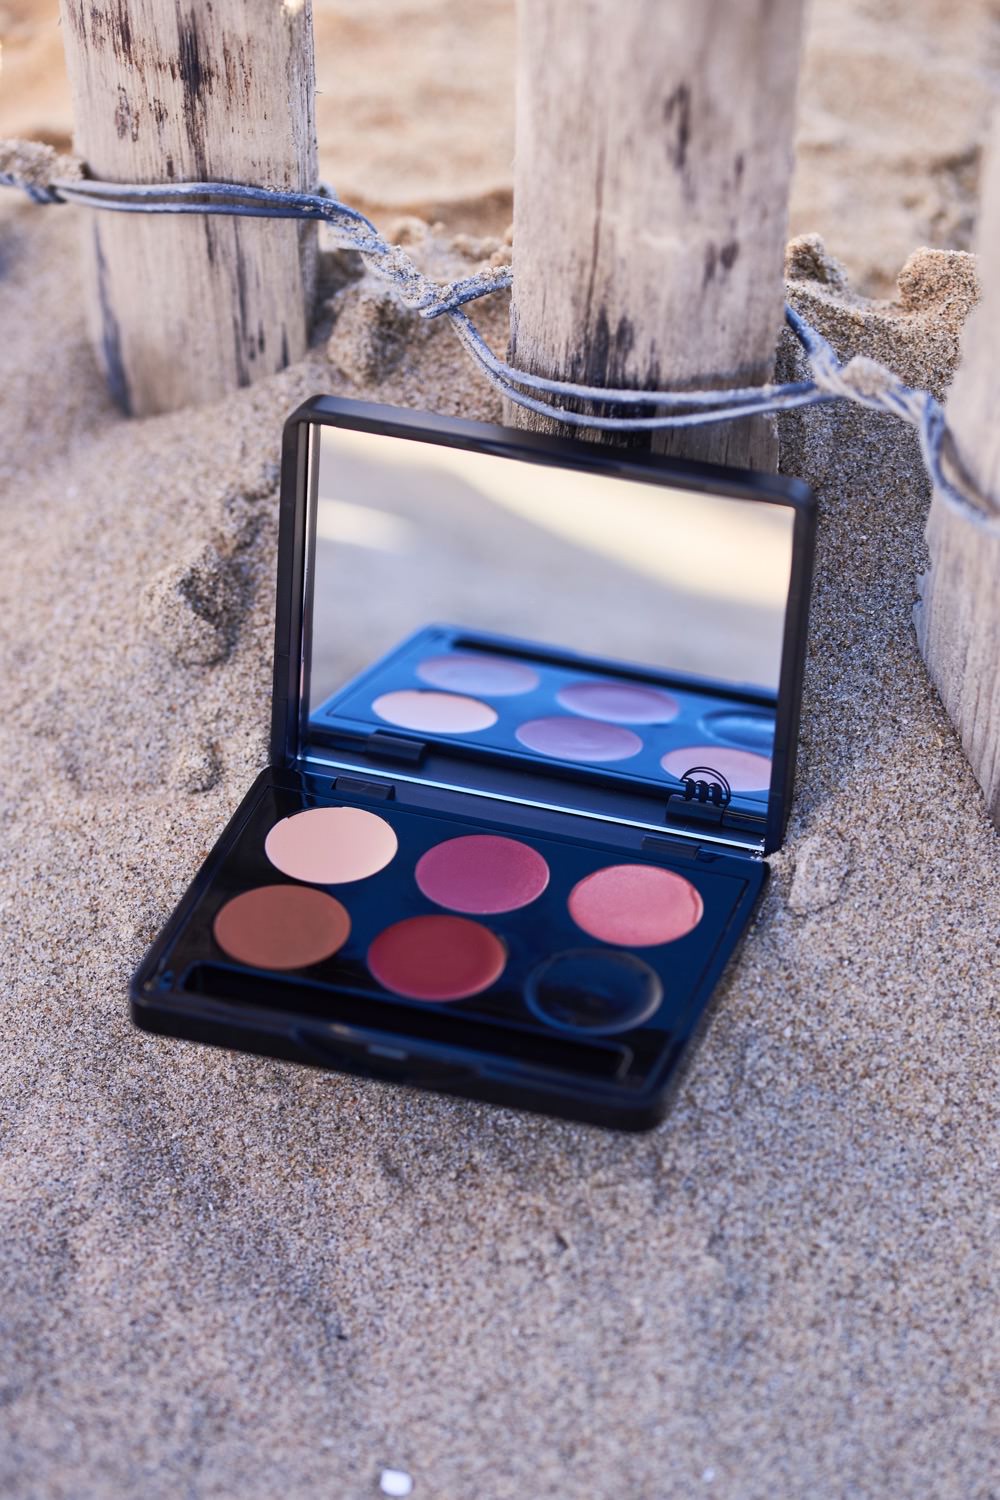 One Face One Palette - Geen Bluf - Make-up Studio - Make-up Palette